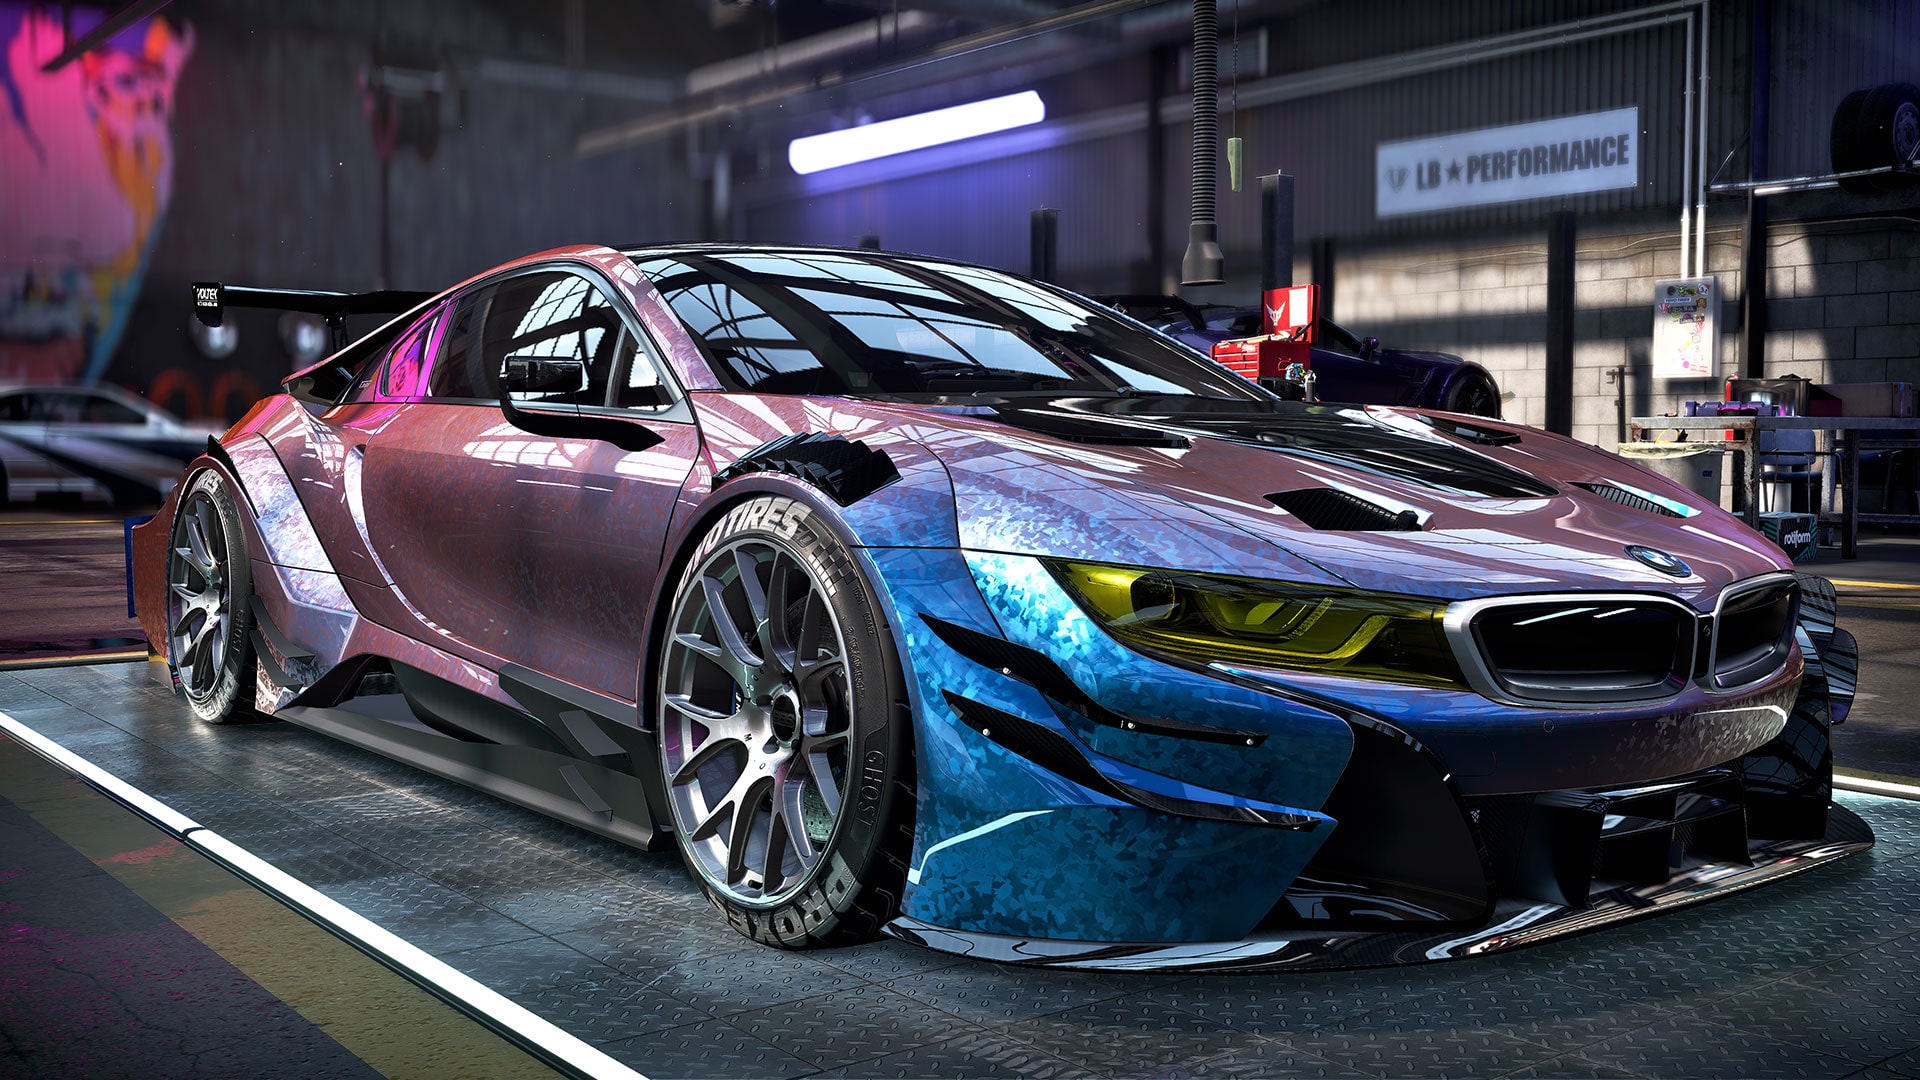 need for speed heat playstation 4 store